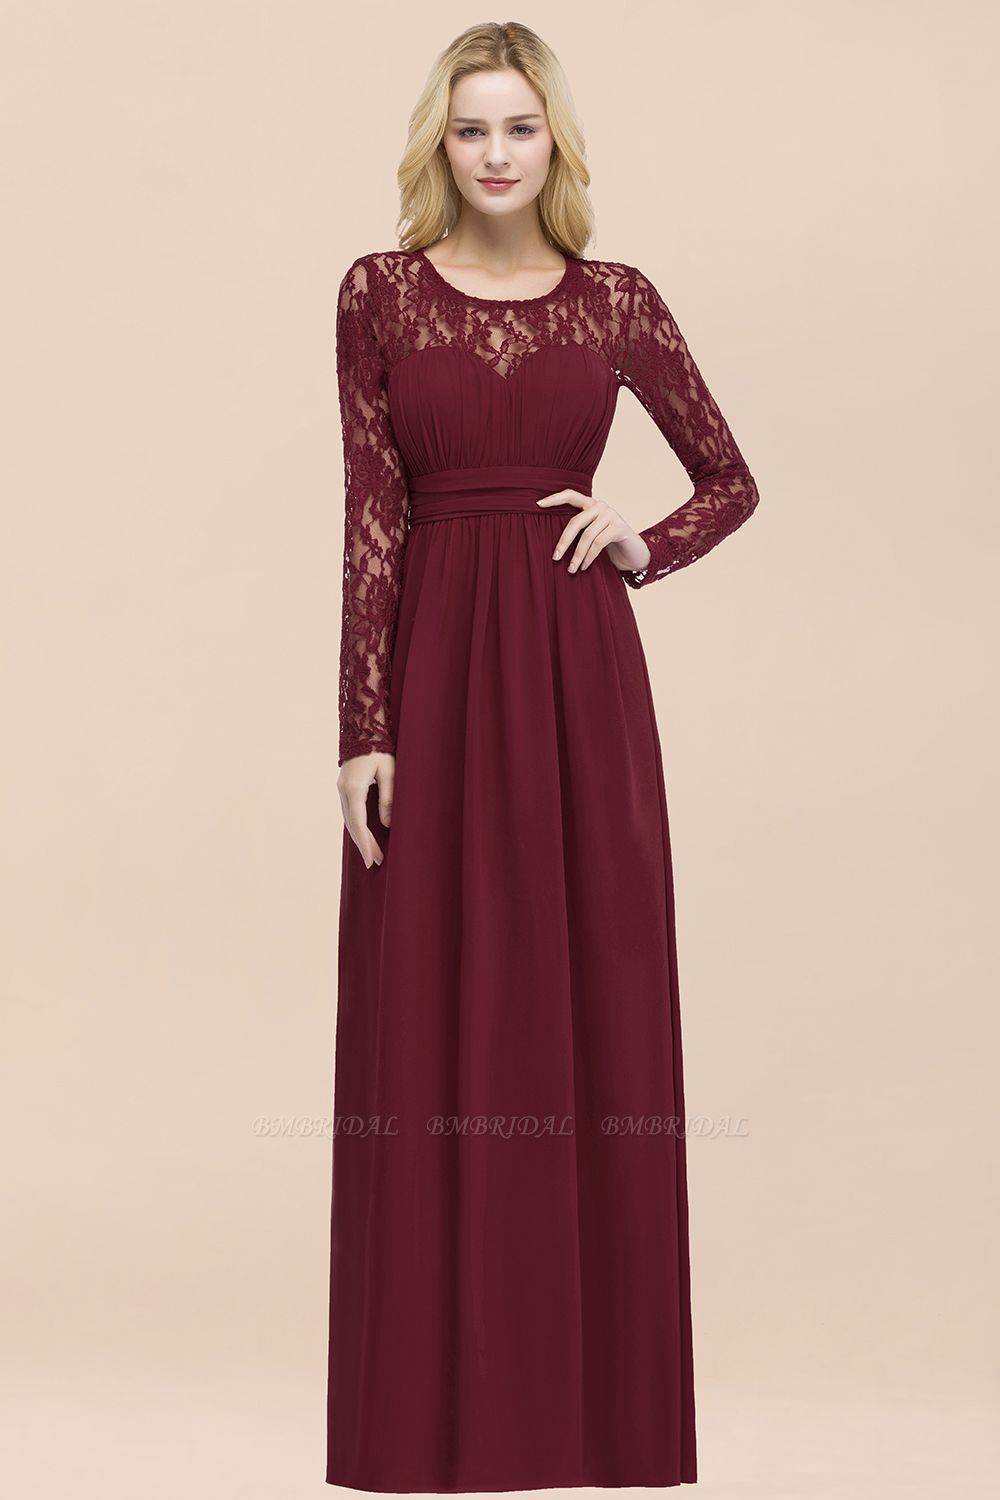 Try at Home Sample Bridesmaid Dress Burgundy Mulberry Sky Blue